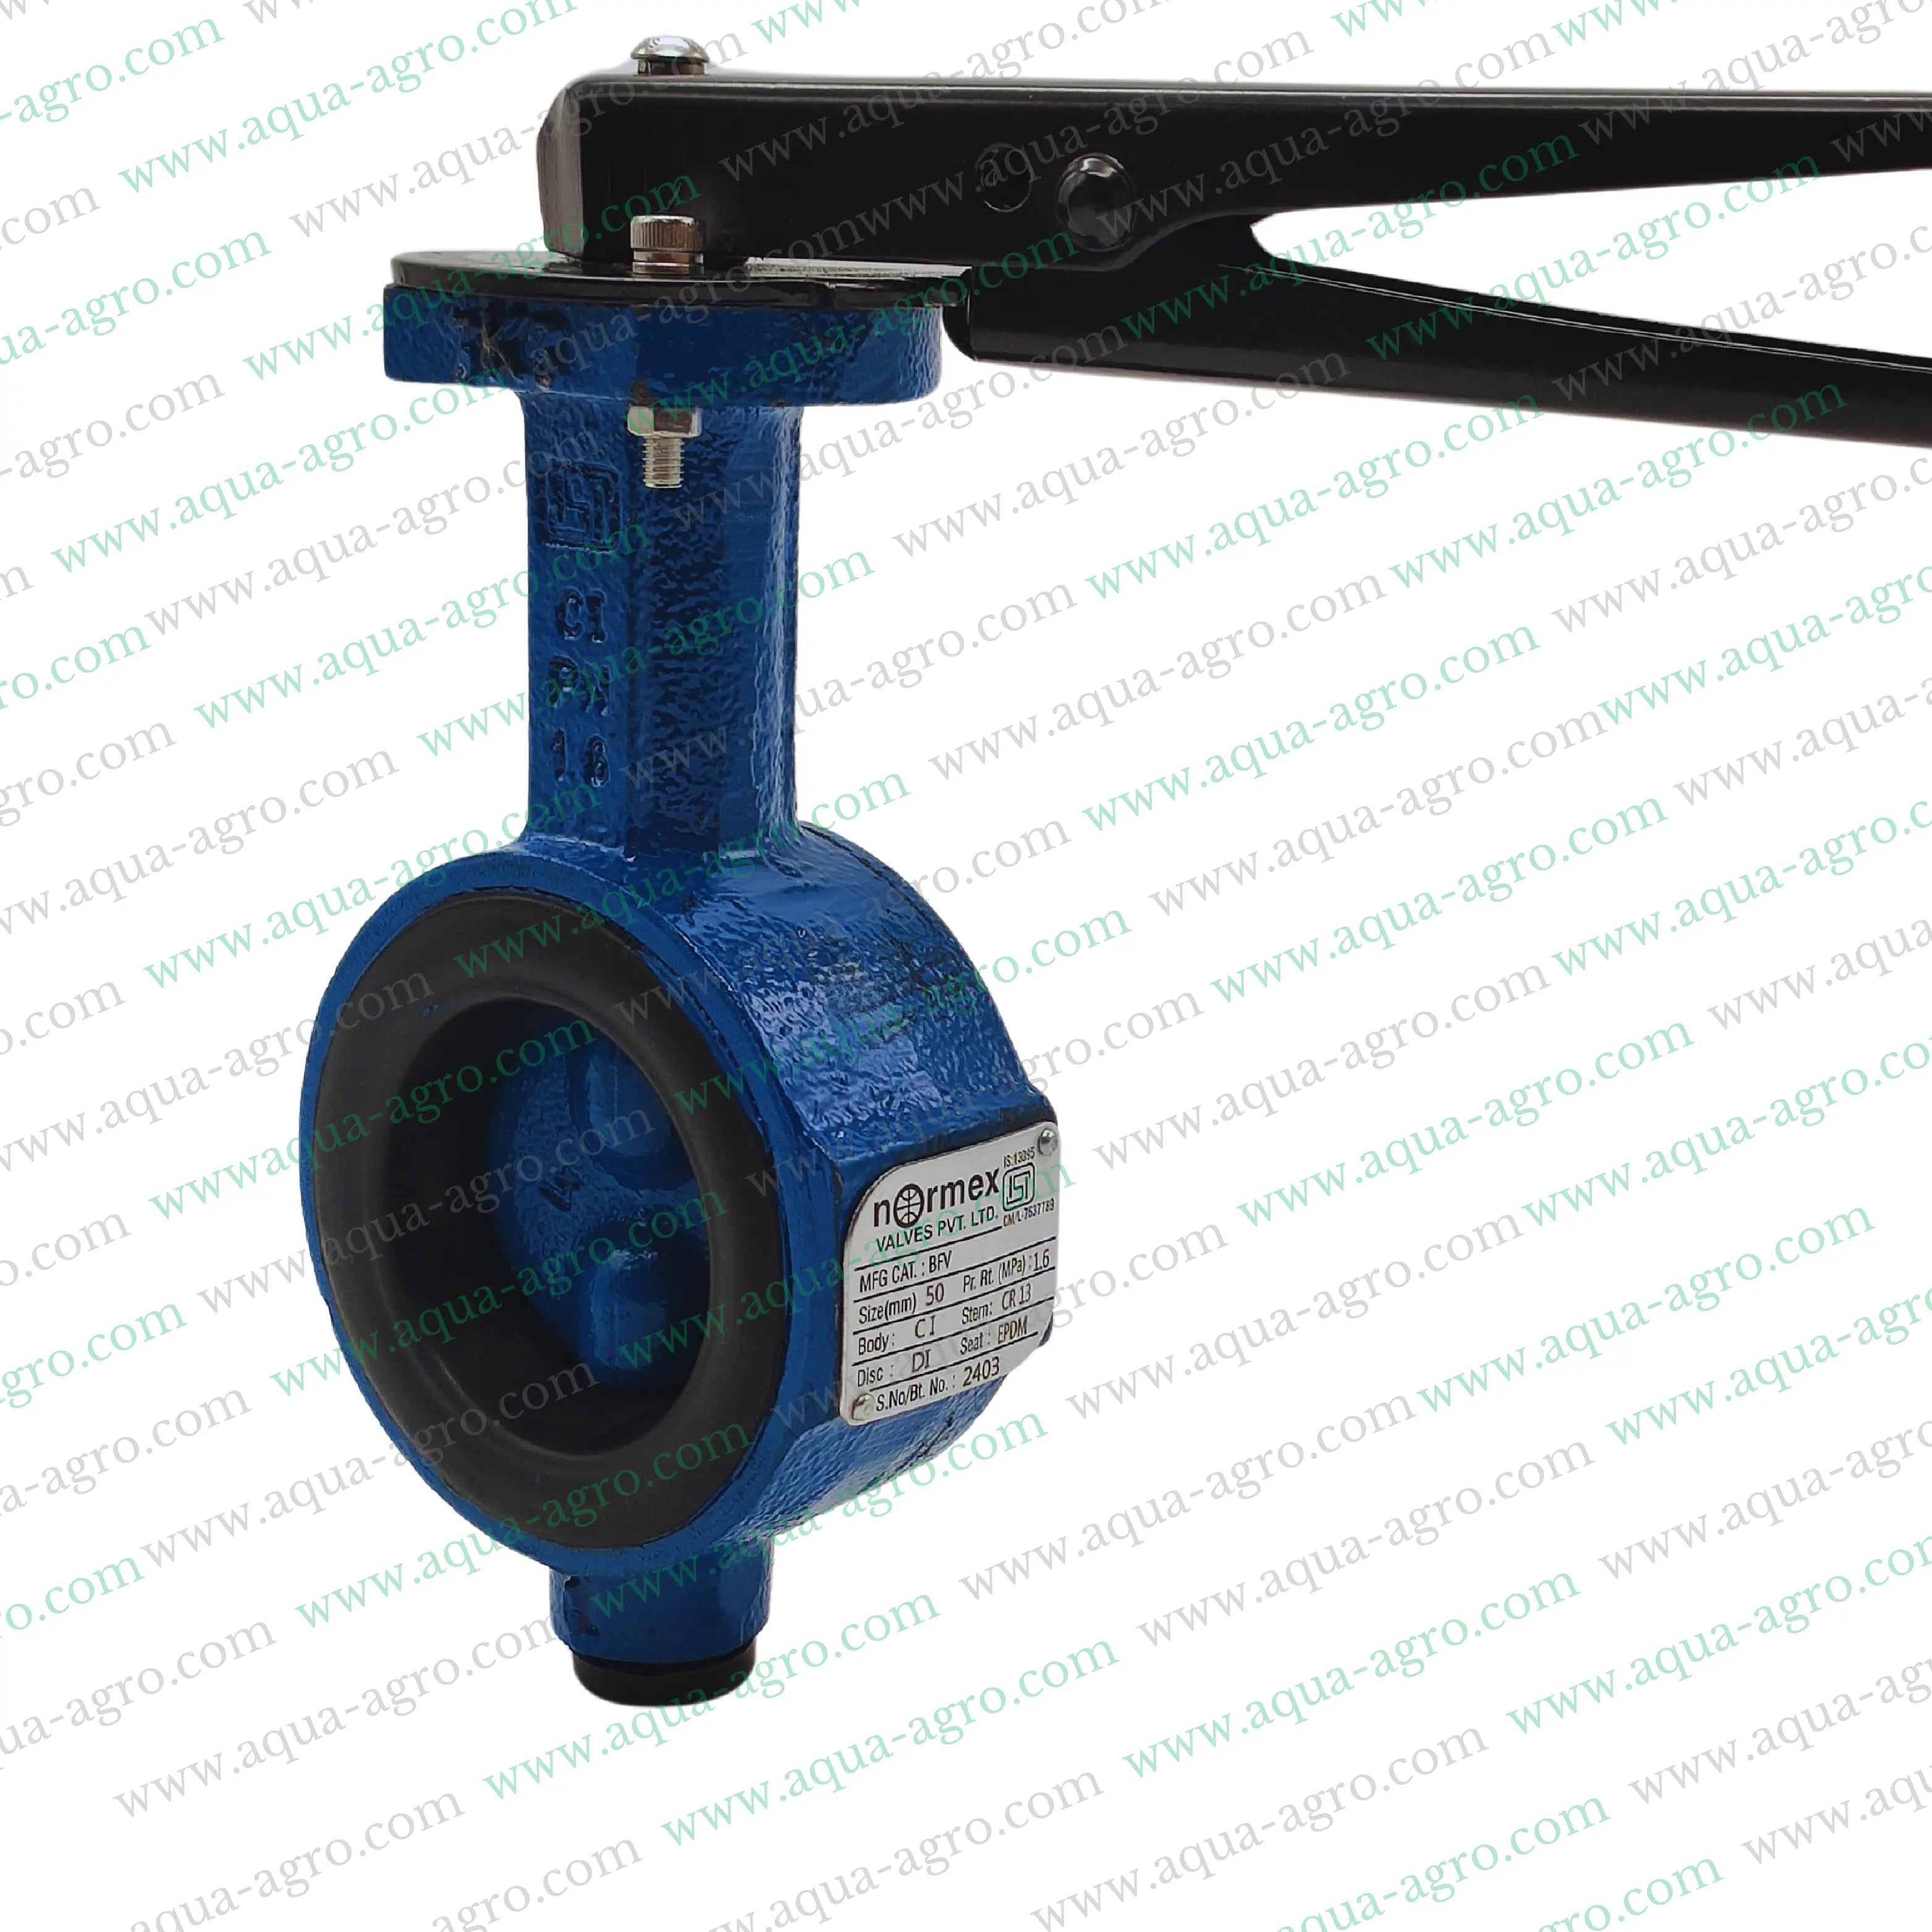 NORMEX | Valves - Butterfly Valves - Metal - C.I Body with SG Metal disc - 2" (50mm)